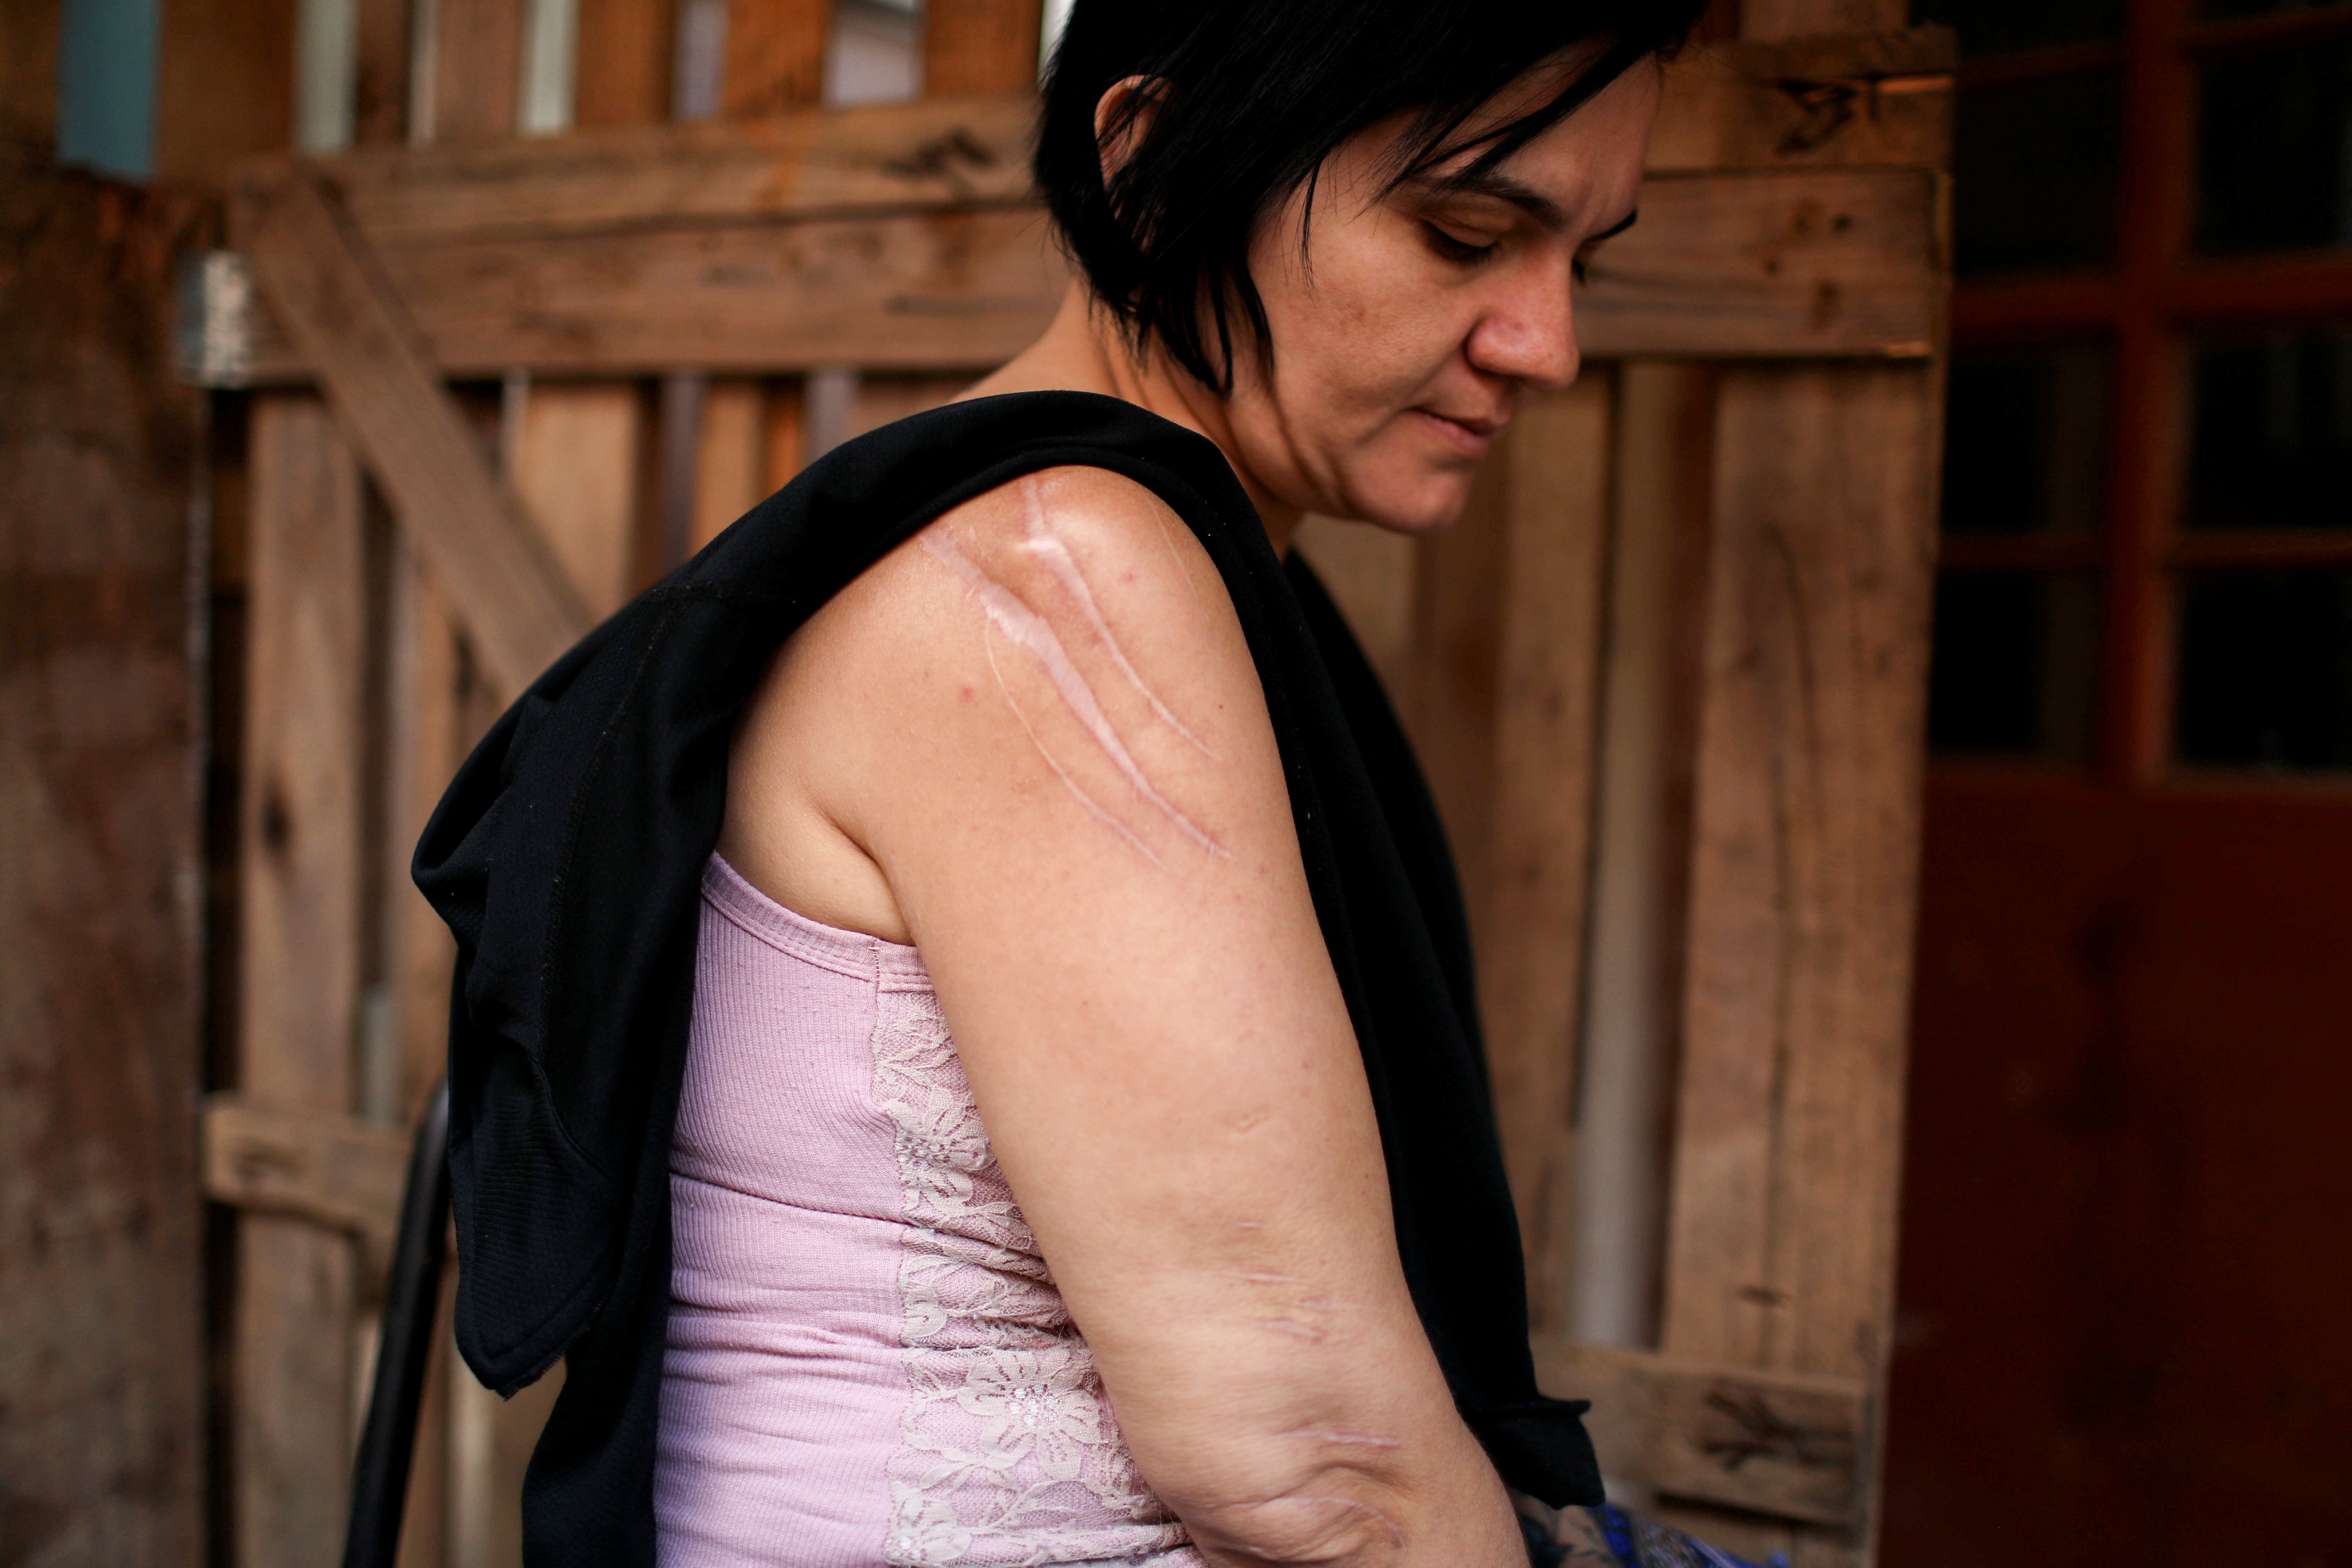 The Wider Image: Brazil women suffer in silence as COVID-19 sparks domestic terror